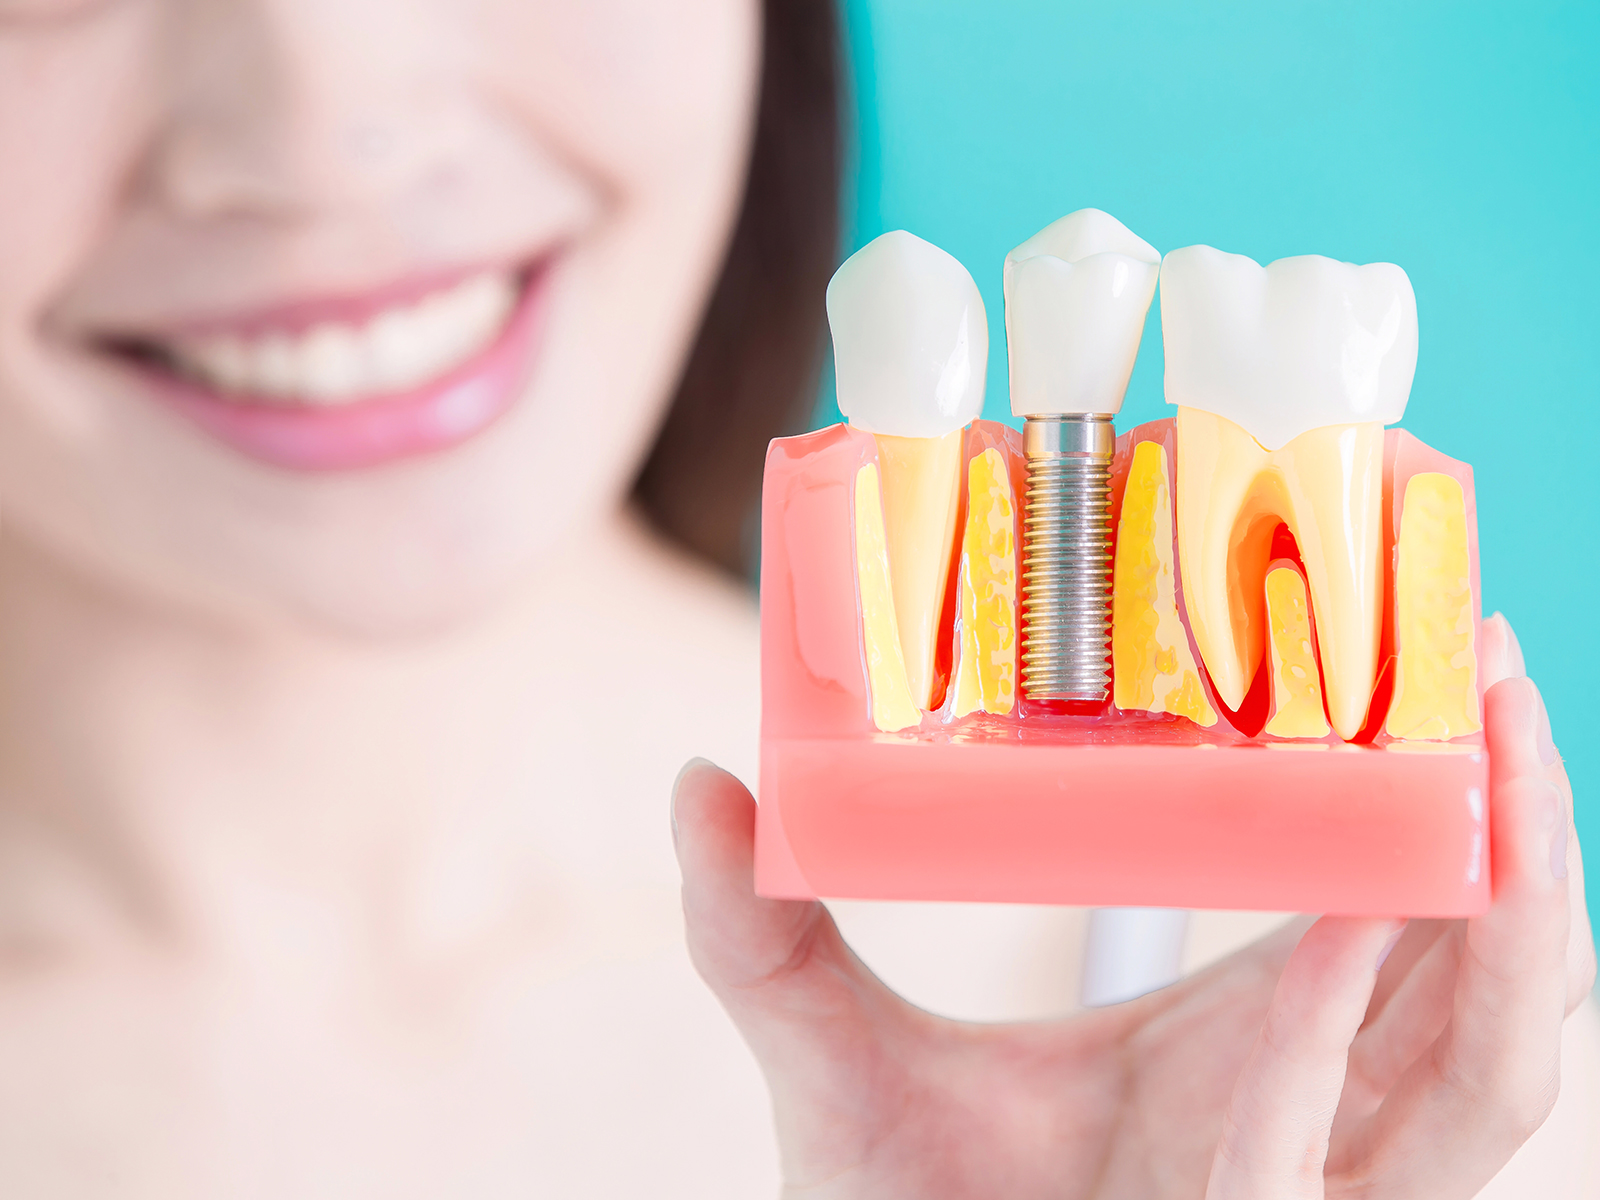 What are the most common causes of dental implant failure?